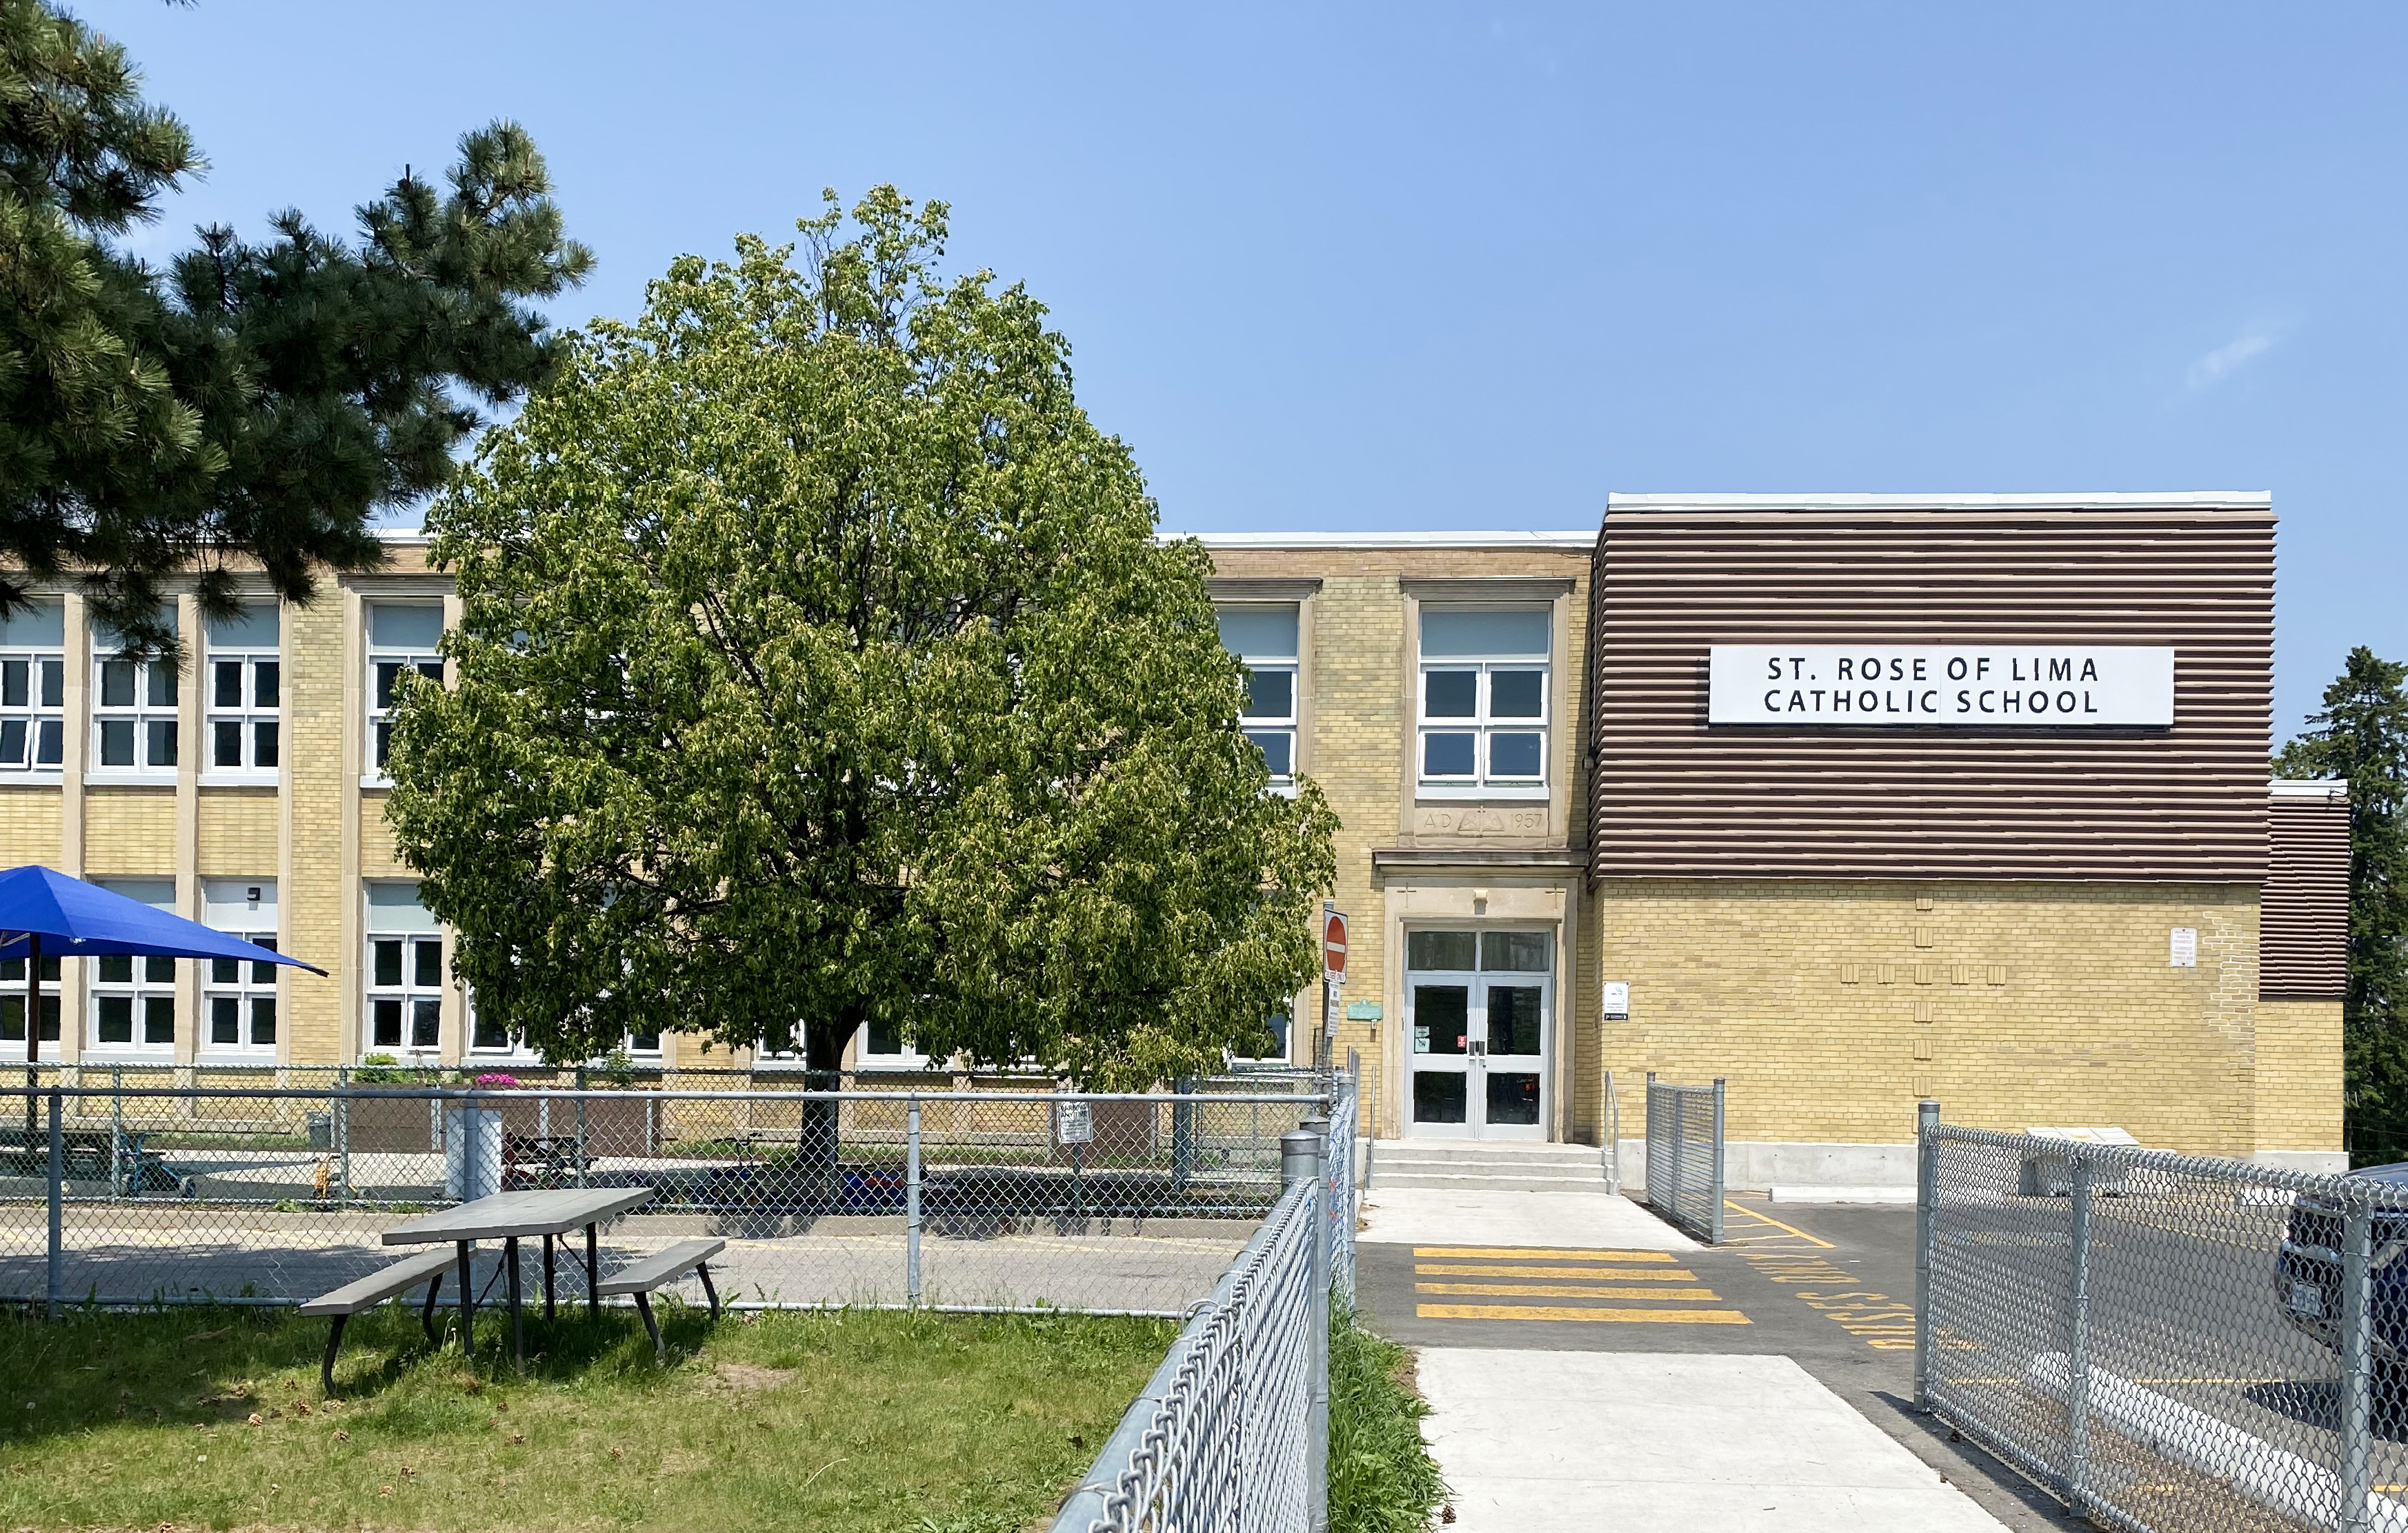 The front of the school building